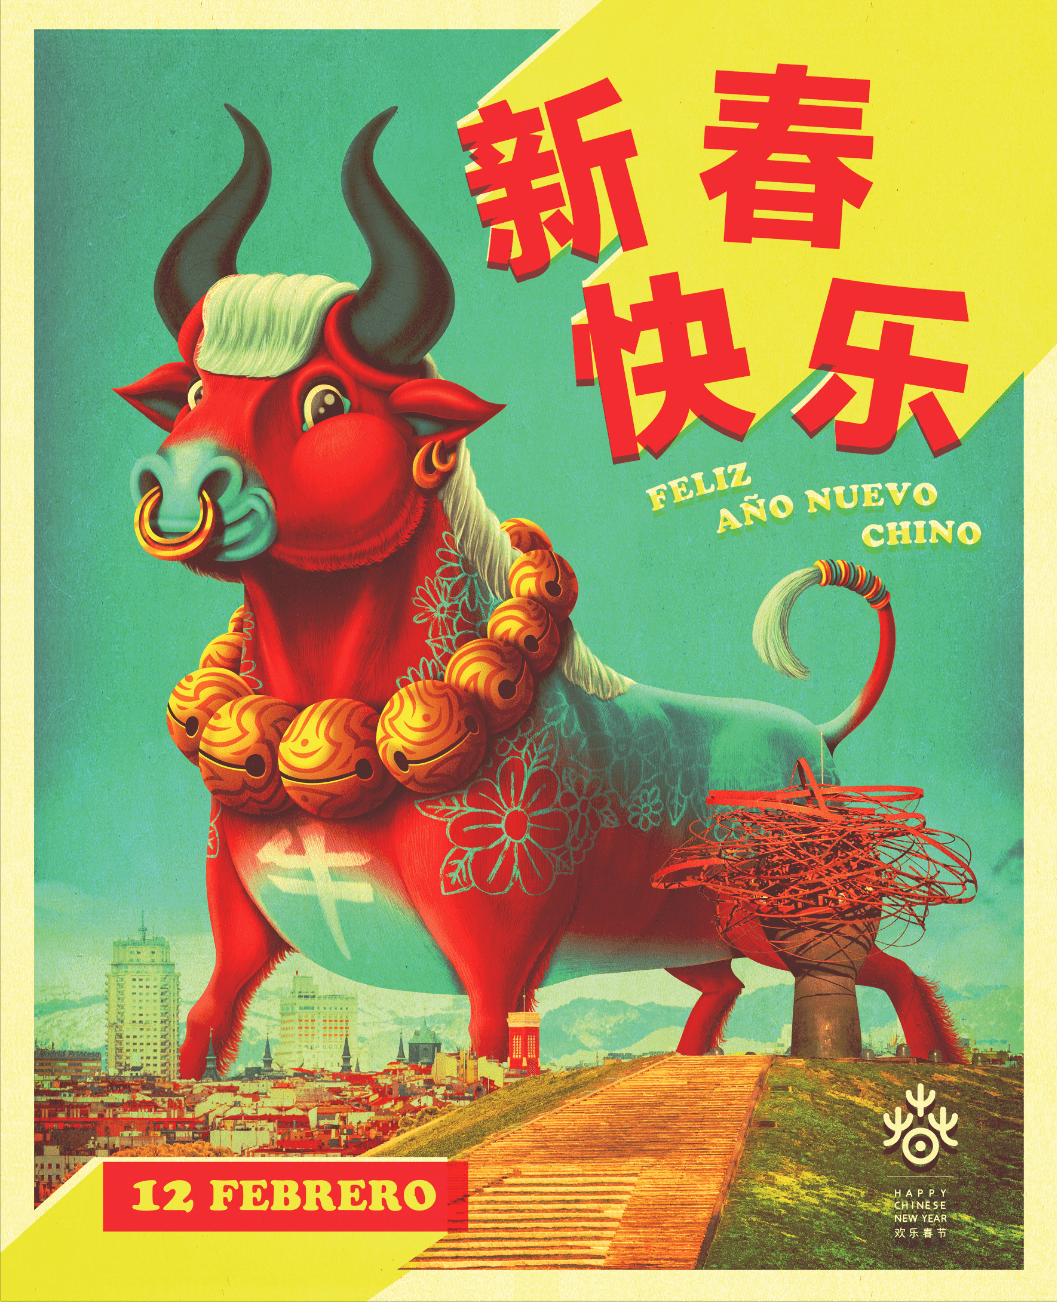 Advertising  chinese new year poster